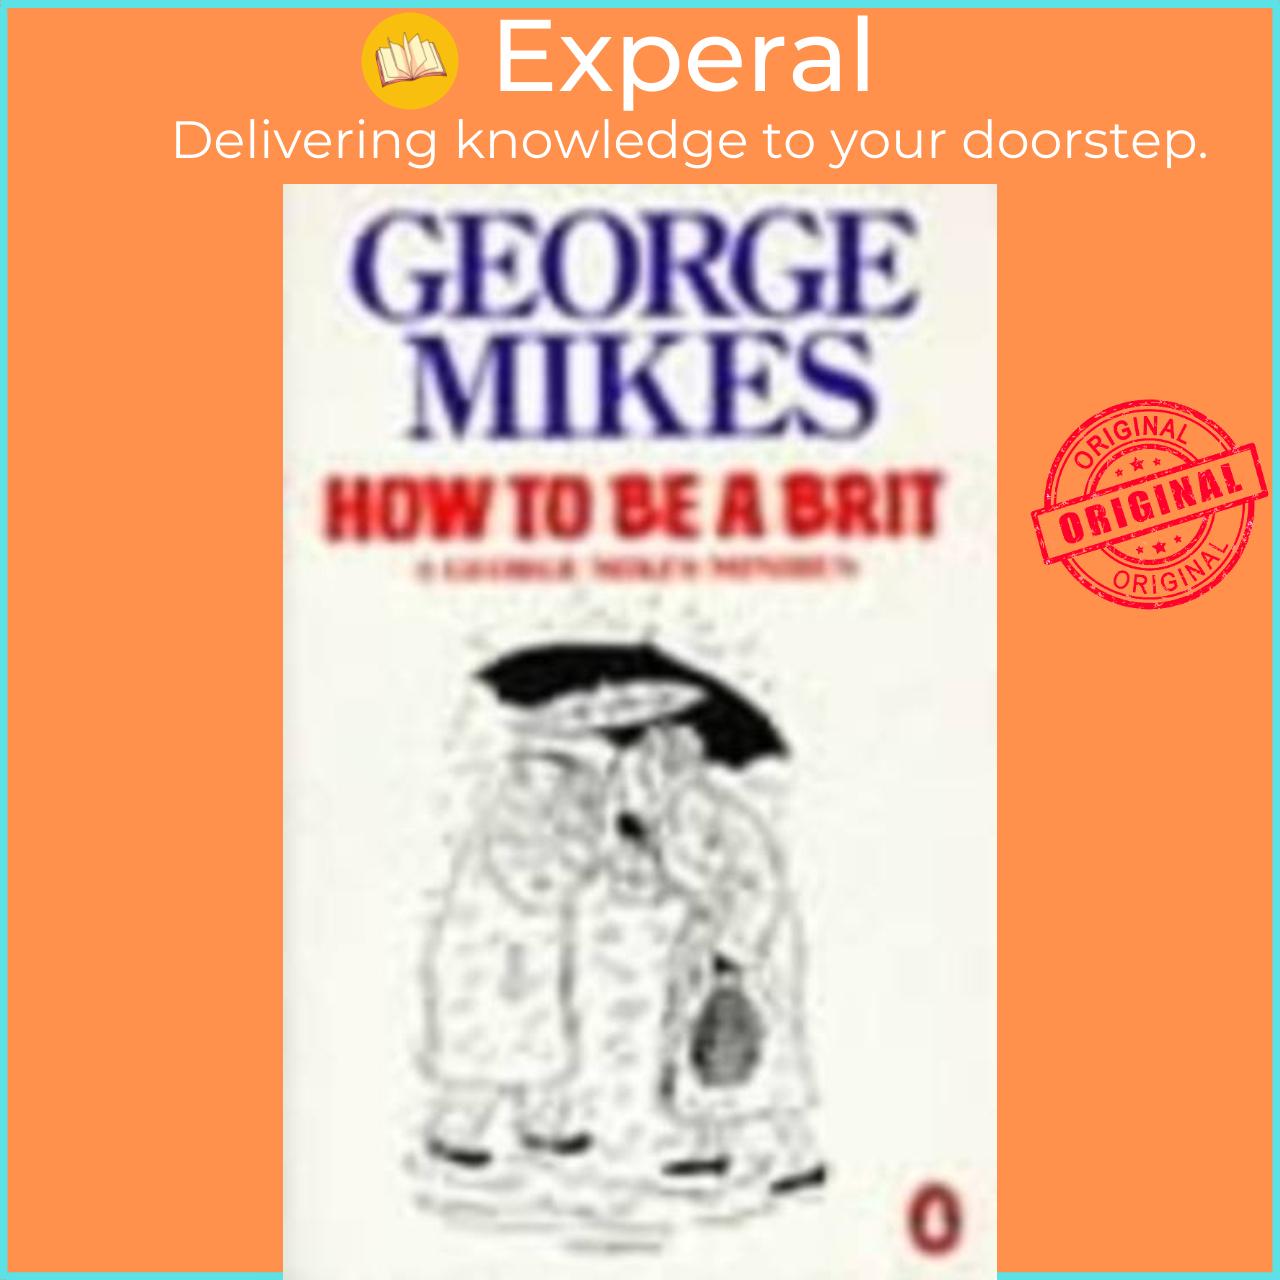 Sách - How to be a Brit - The Classic Bestselling Guide by George Mikes (UK edition, paperback)